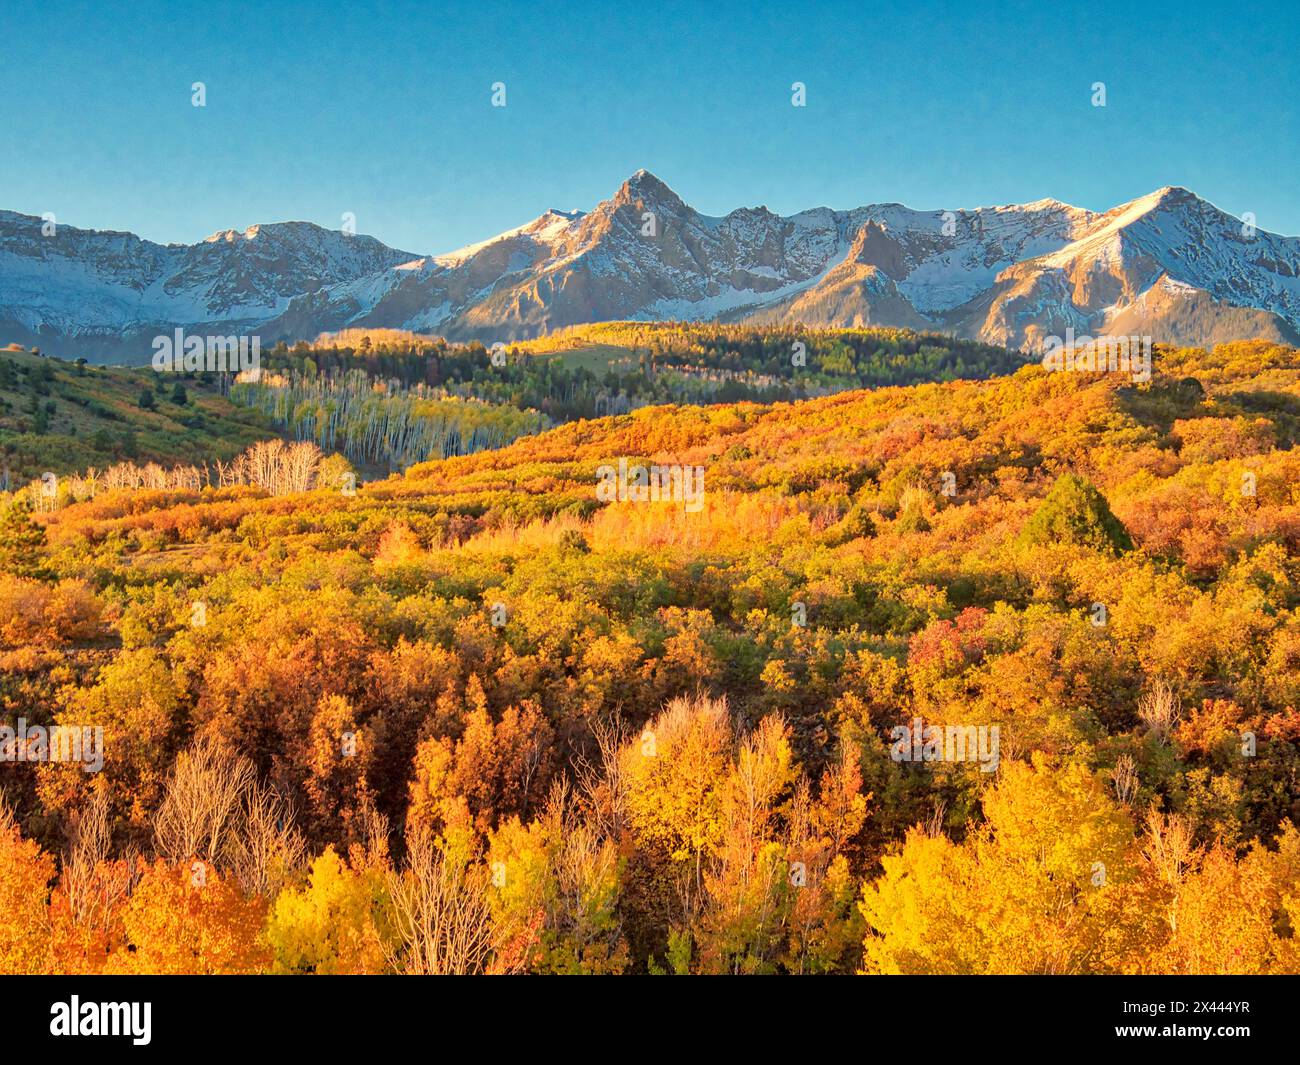 USA, Colorado, Quray. Dallas Divide, sunrise on the Mt. Snaffles with autumn colors Stock Photo